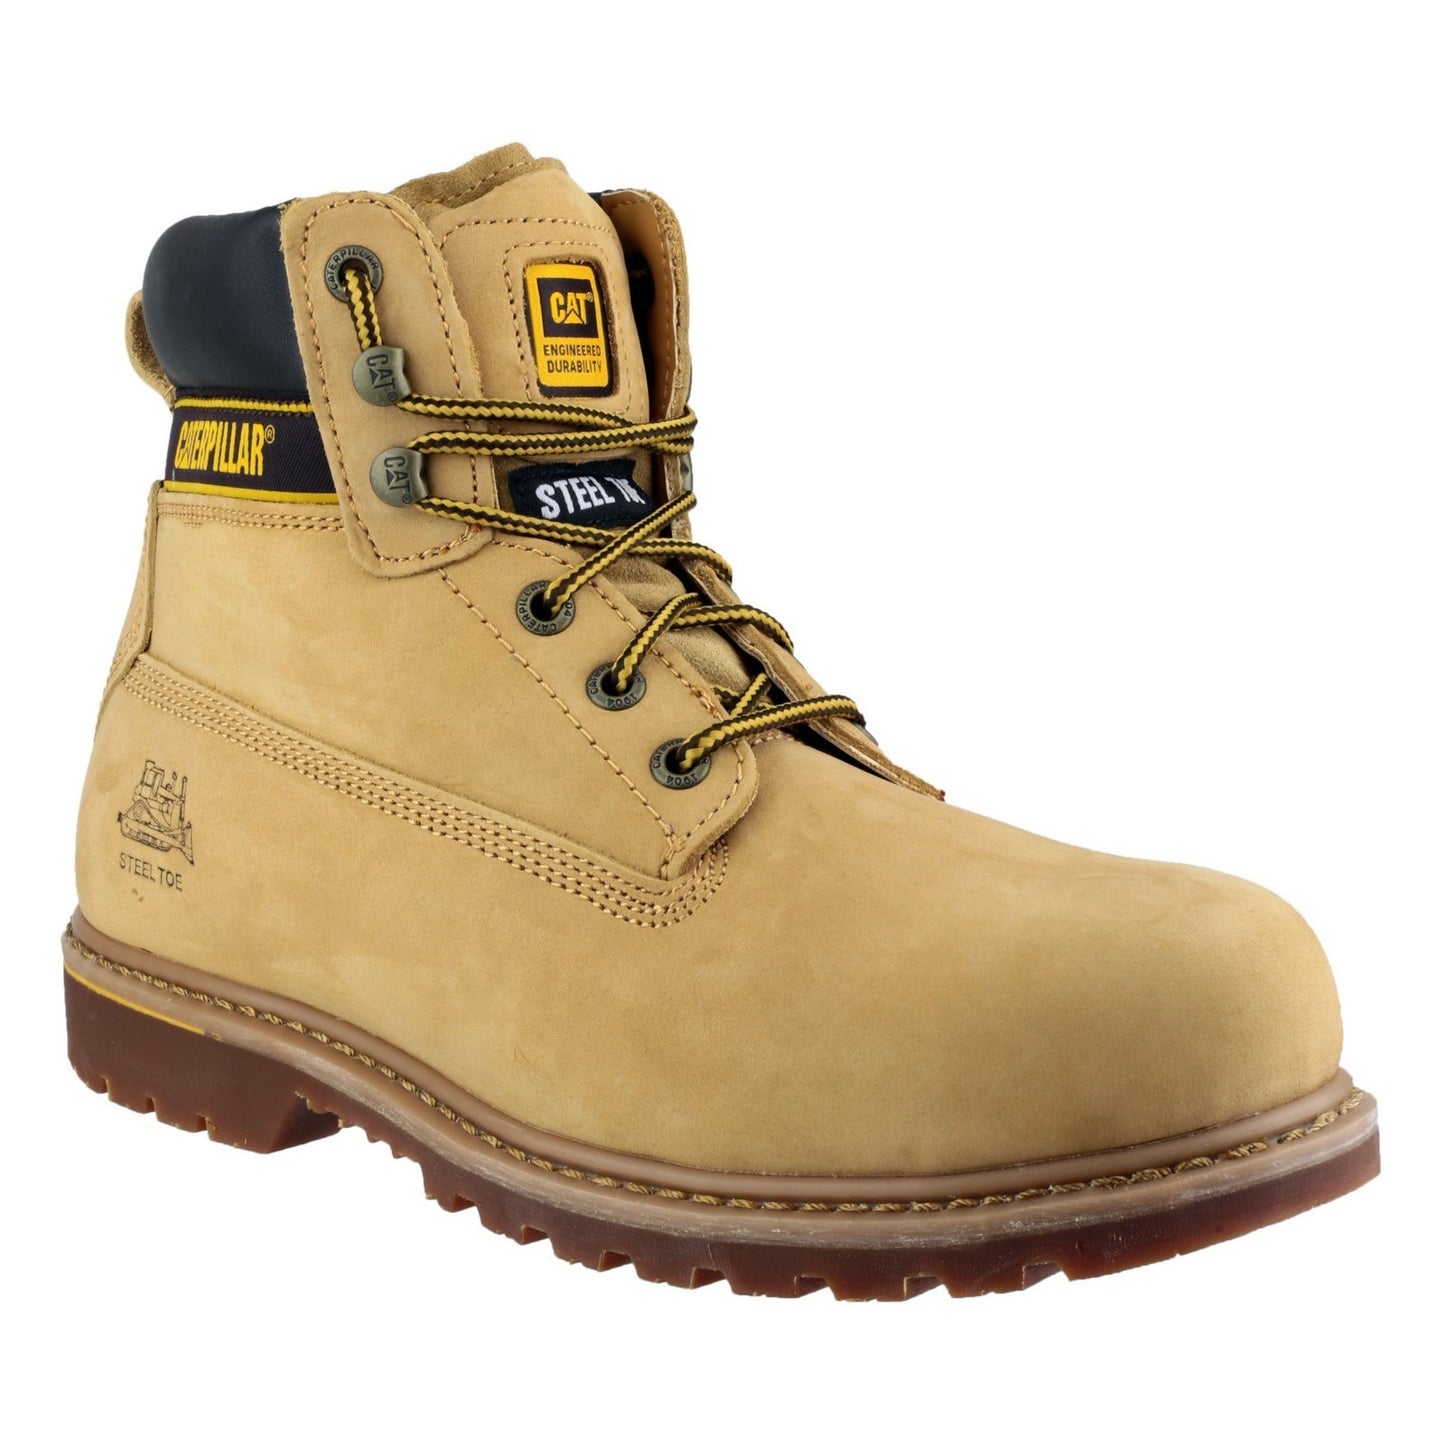 Holton Safety Boot, Caterpillar